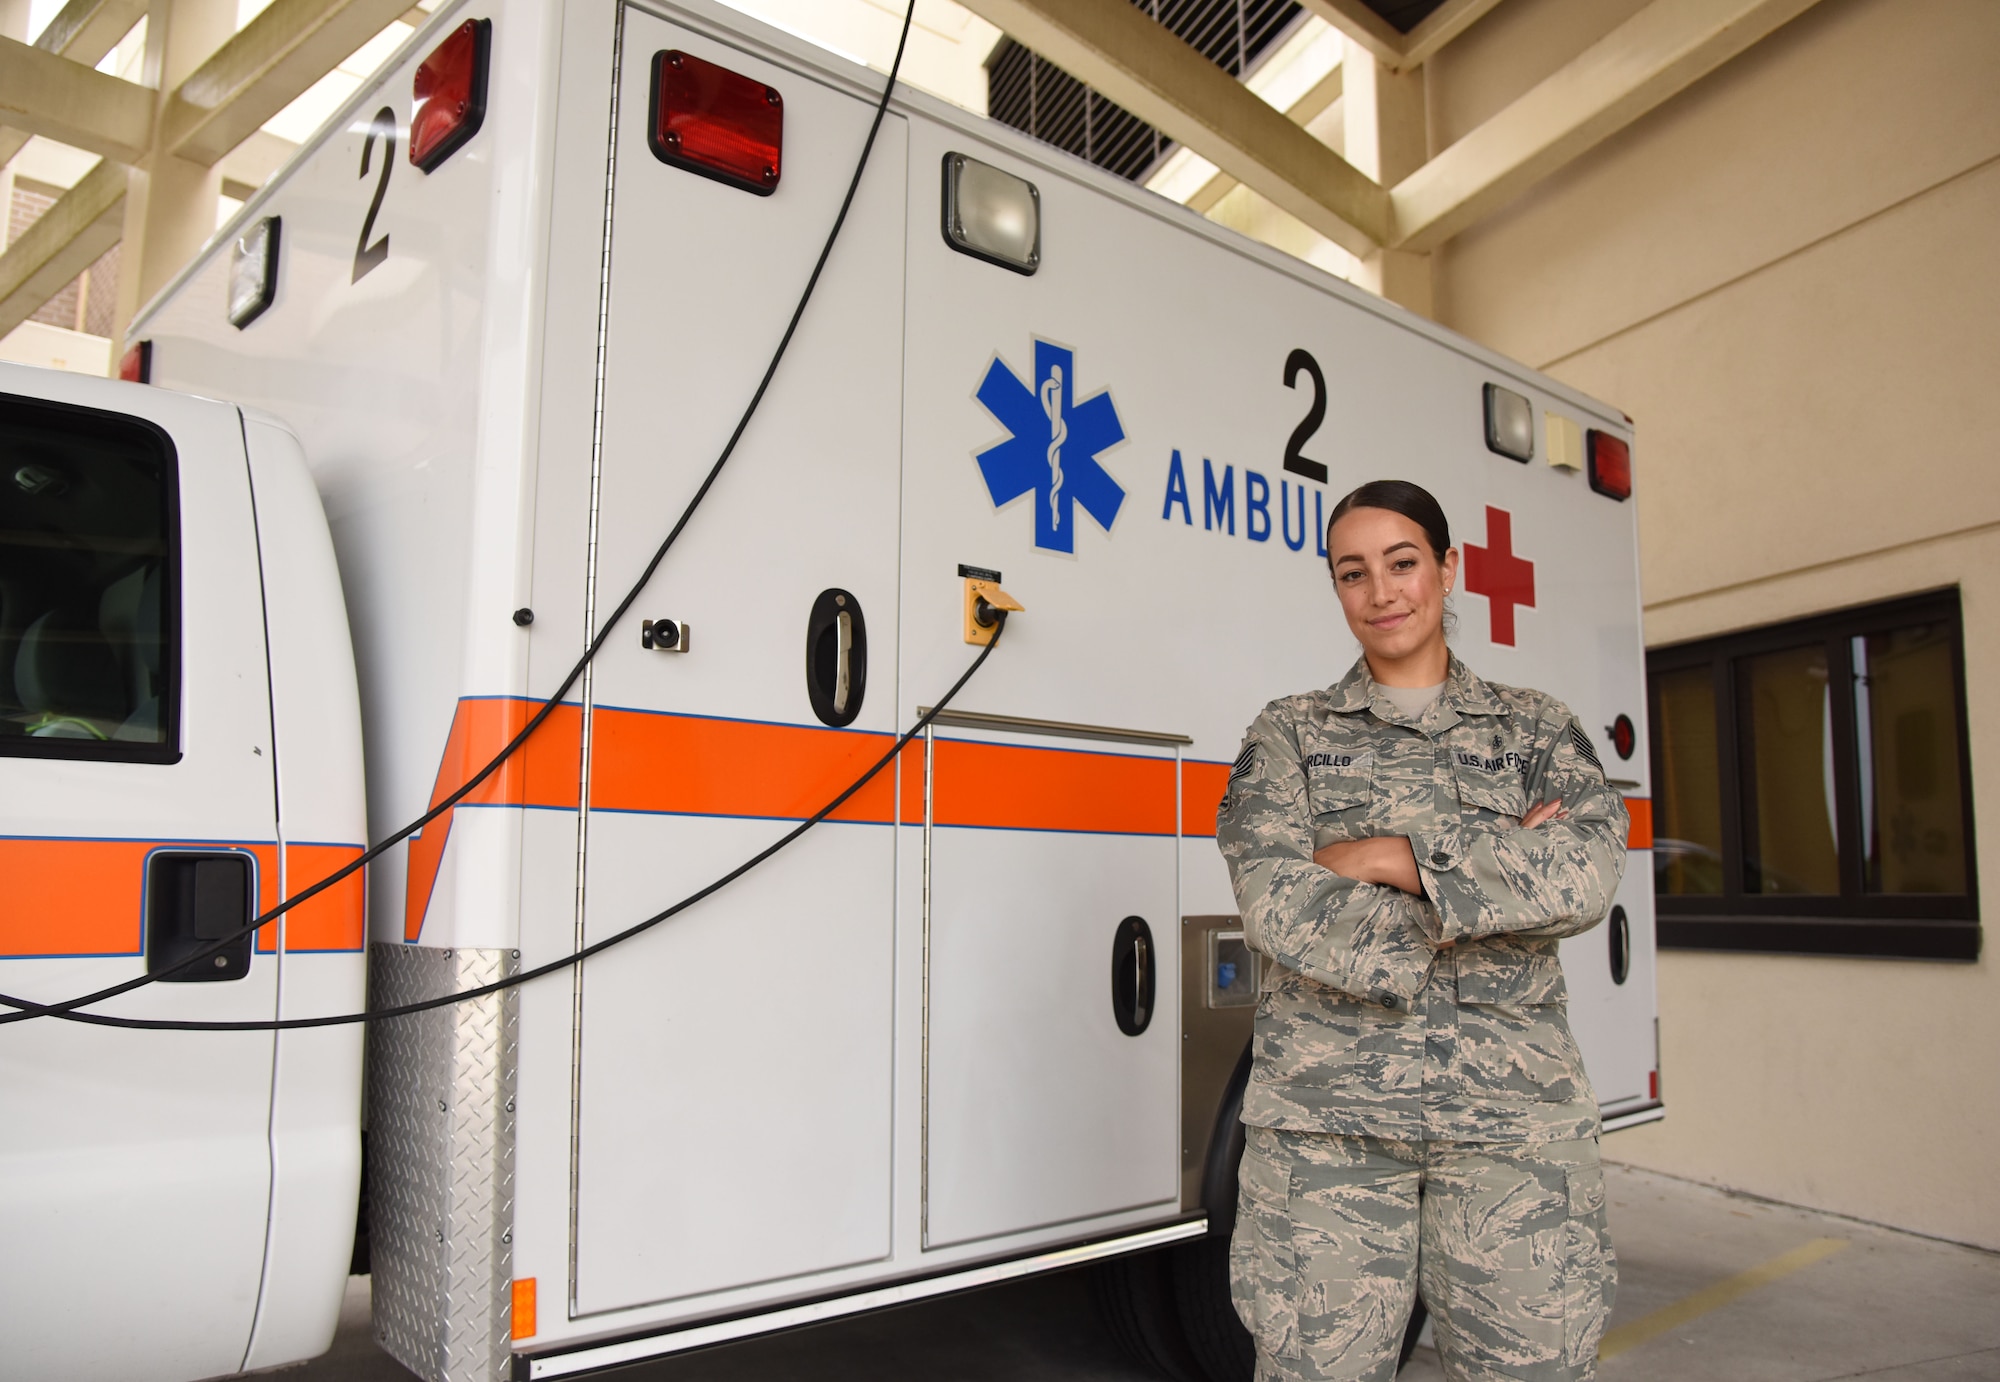 U.S. Air Force Tech. Sgt. Juliet Corcillo, 81st Medical Operations Squadron Emergency Department NCO in charge, poses for a photo in front of an ambulance outside of the Keesler Medical Center at Keesler Air Force Base, Mississippi, June 14, 2018. Corcillo was awarded a full ride scholarship to medical school from the Air Force’s Health Professions Scholarship Program. (U.S. Air Force photo by Kemberly Groue)